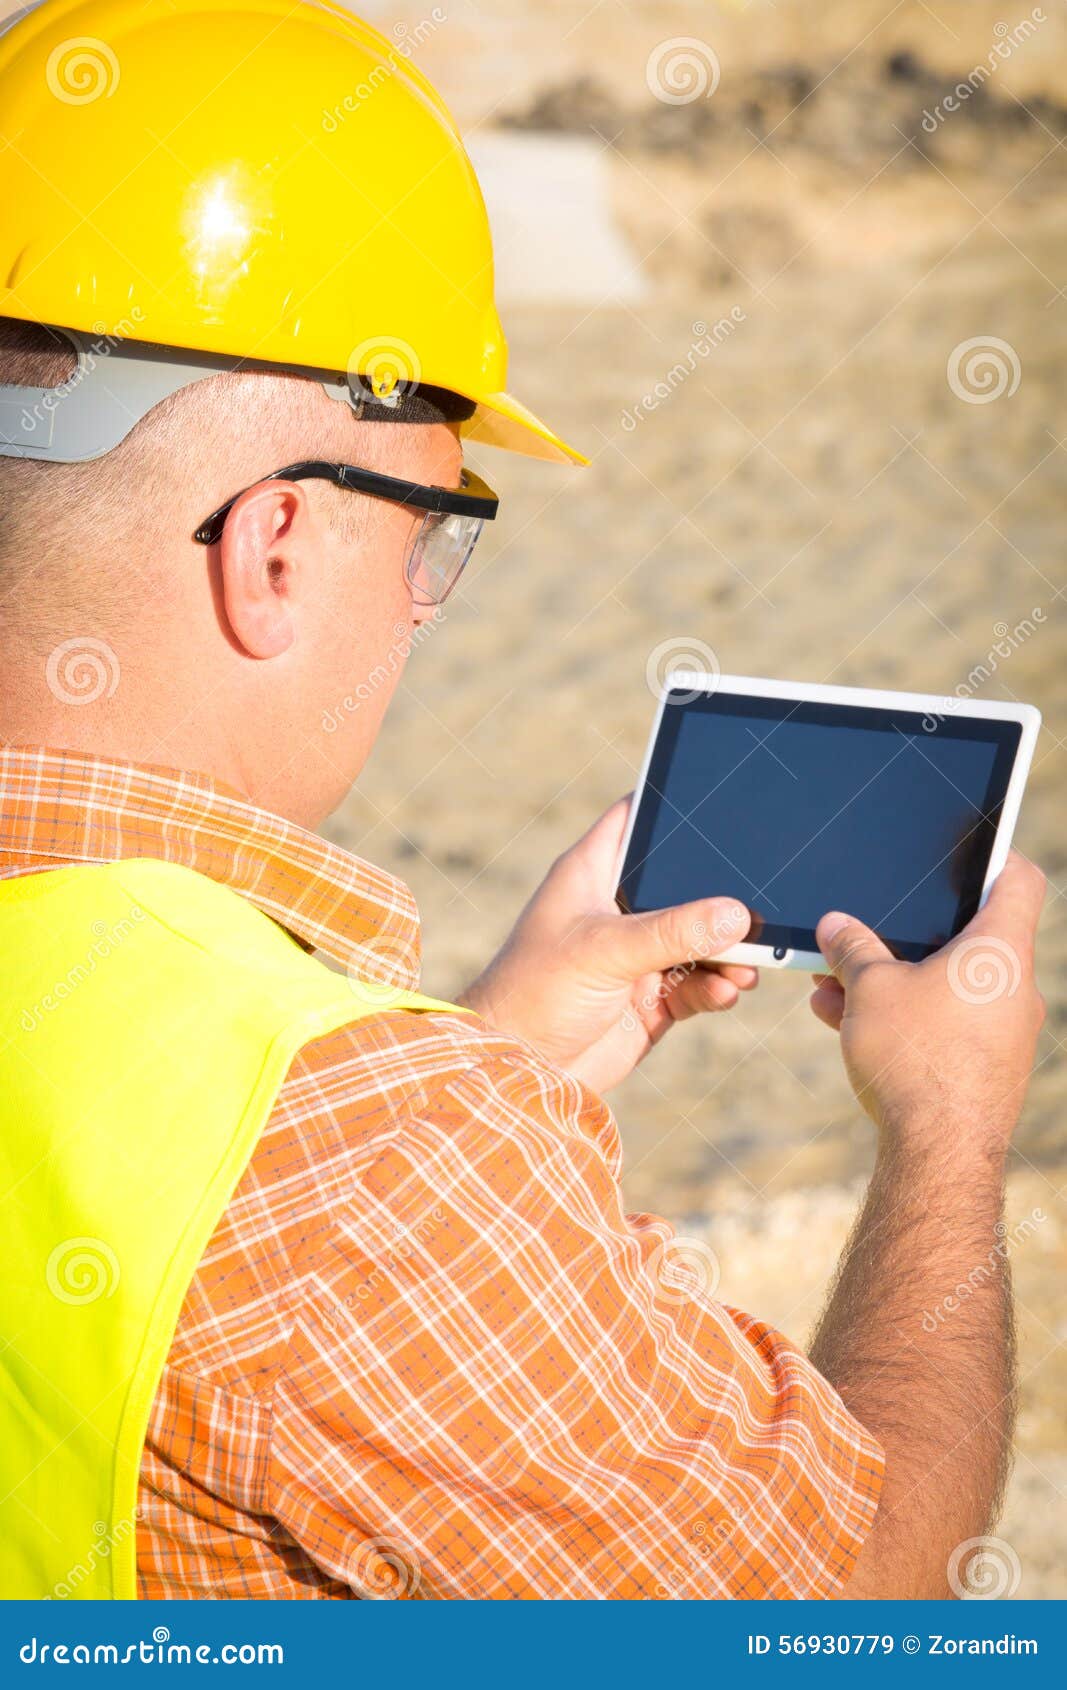 Architect On Building Site Using Digital Tablet on construction site